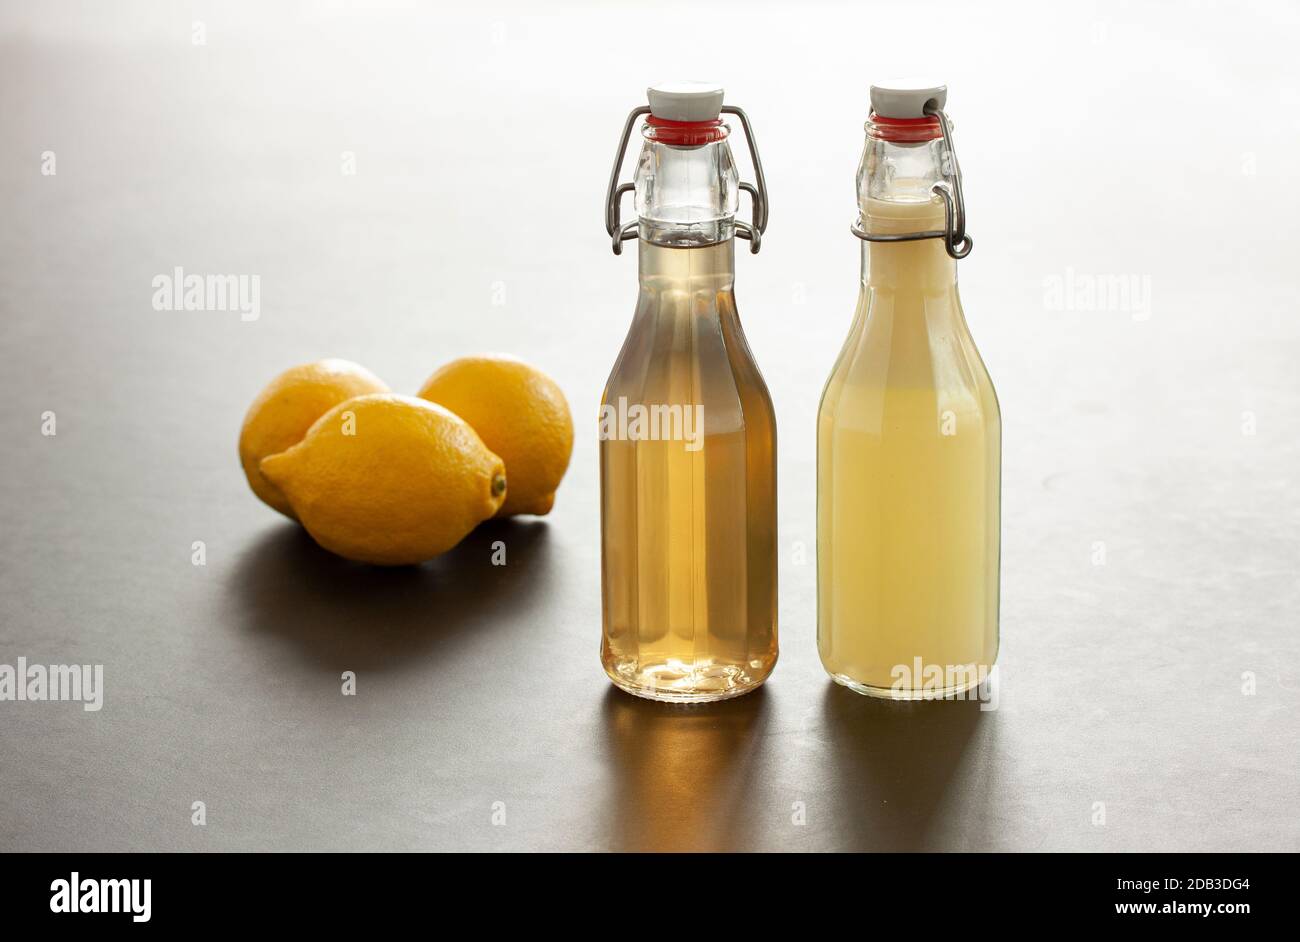 Two flip-top patent closure bottles with homemade lemon syrup or juice and three lemons in background. Partly backlit studio shot image with reflectio Stock Photo